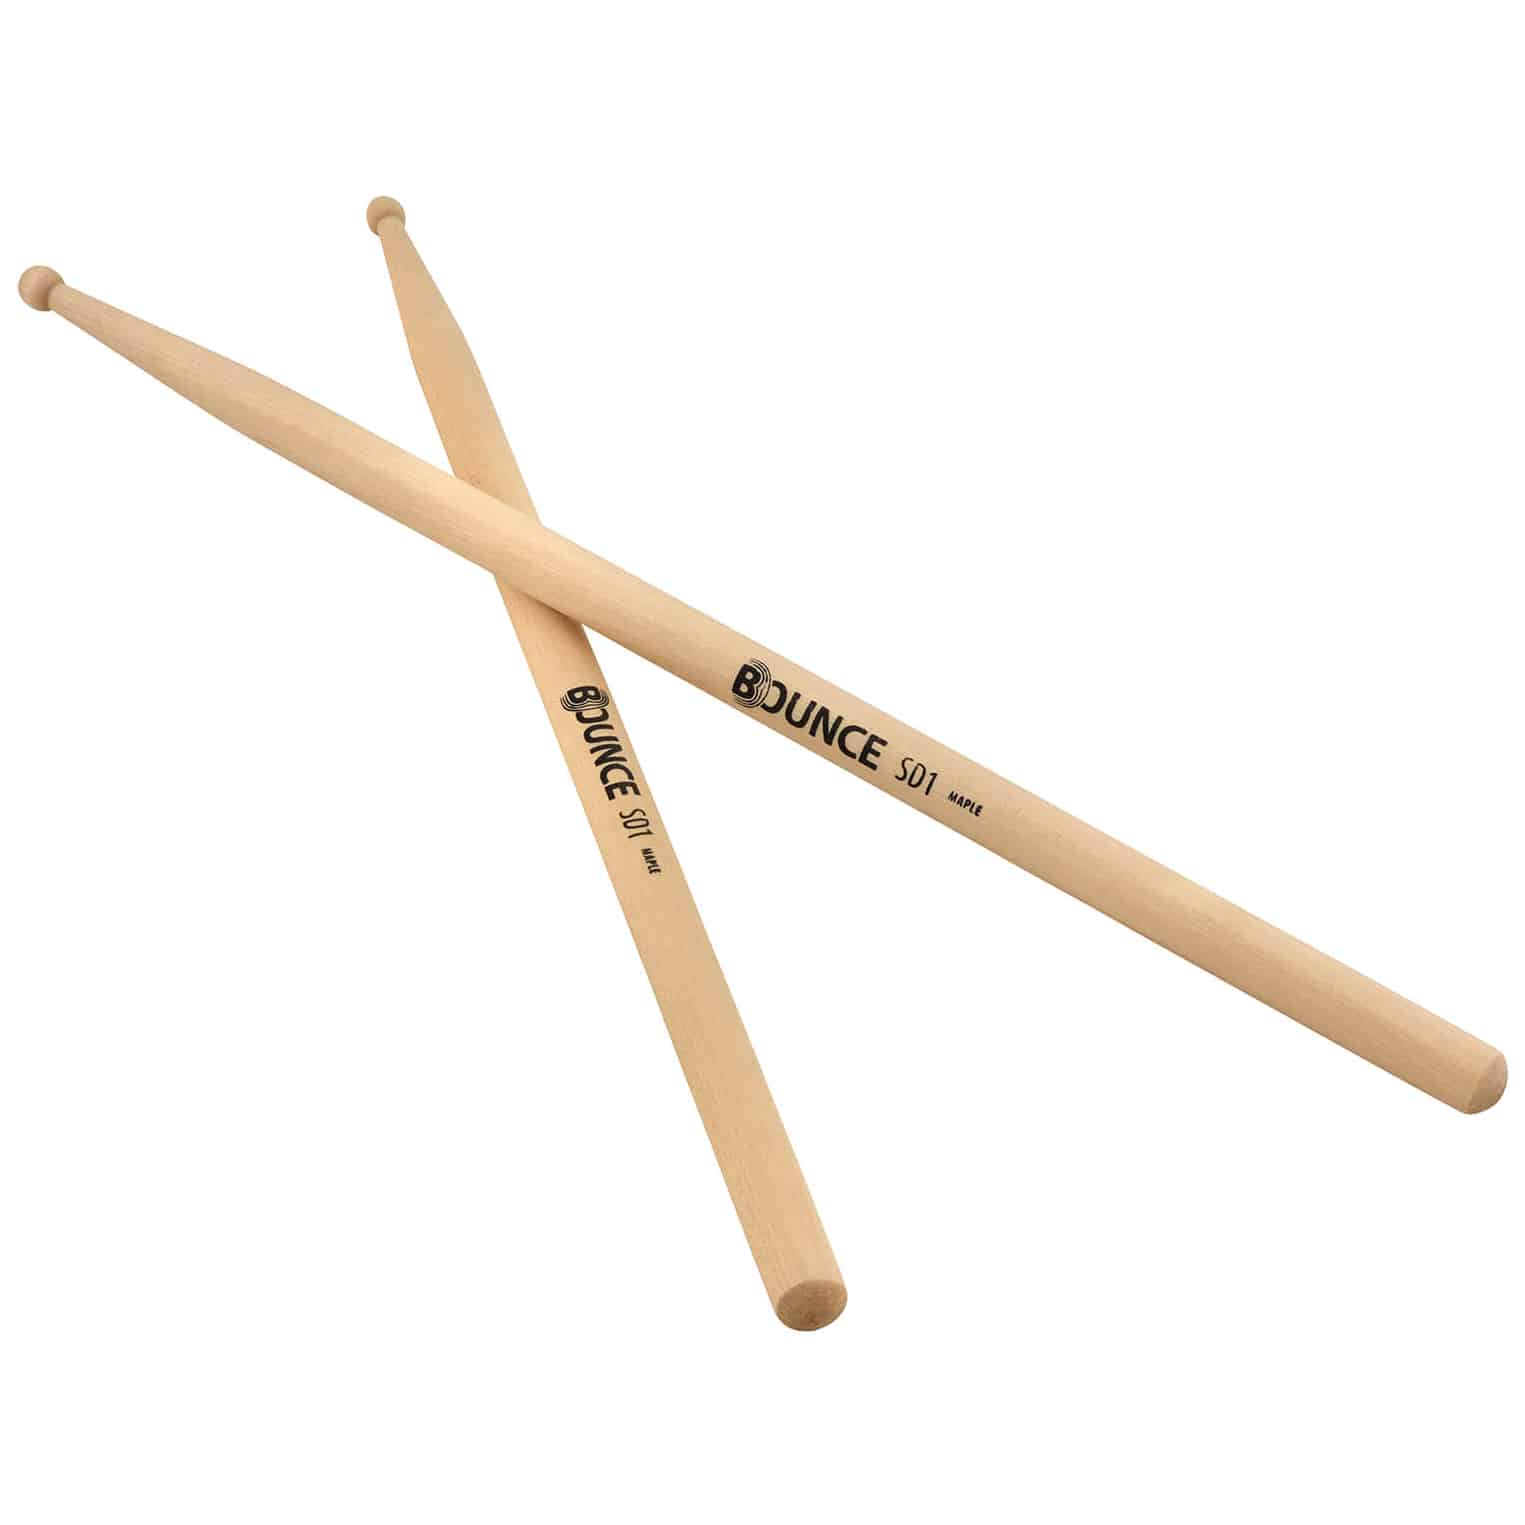 Bounce SD1 Drumsticks - Maple - Wood Tip